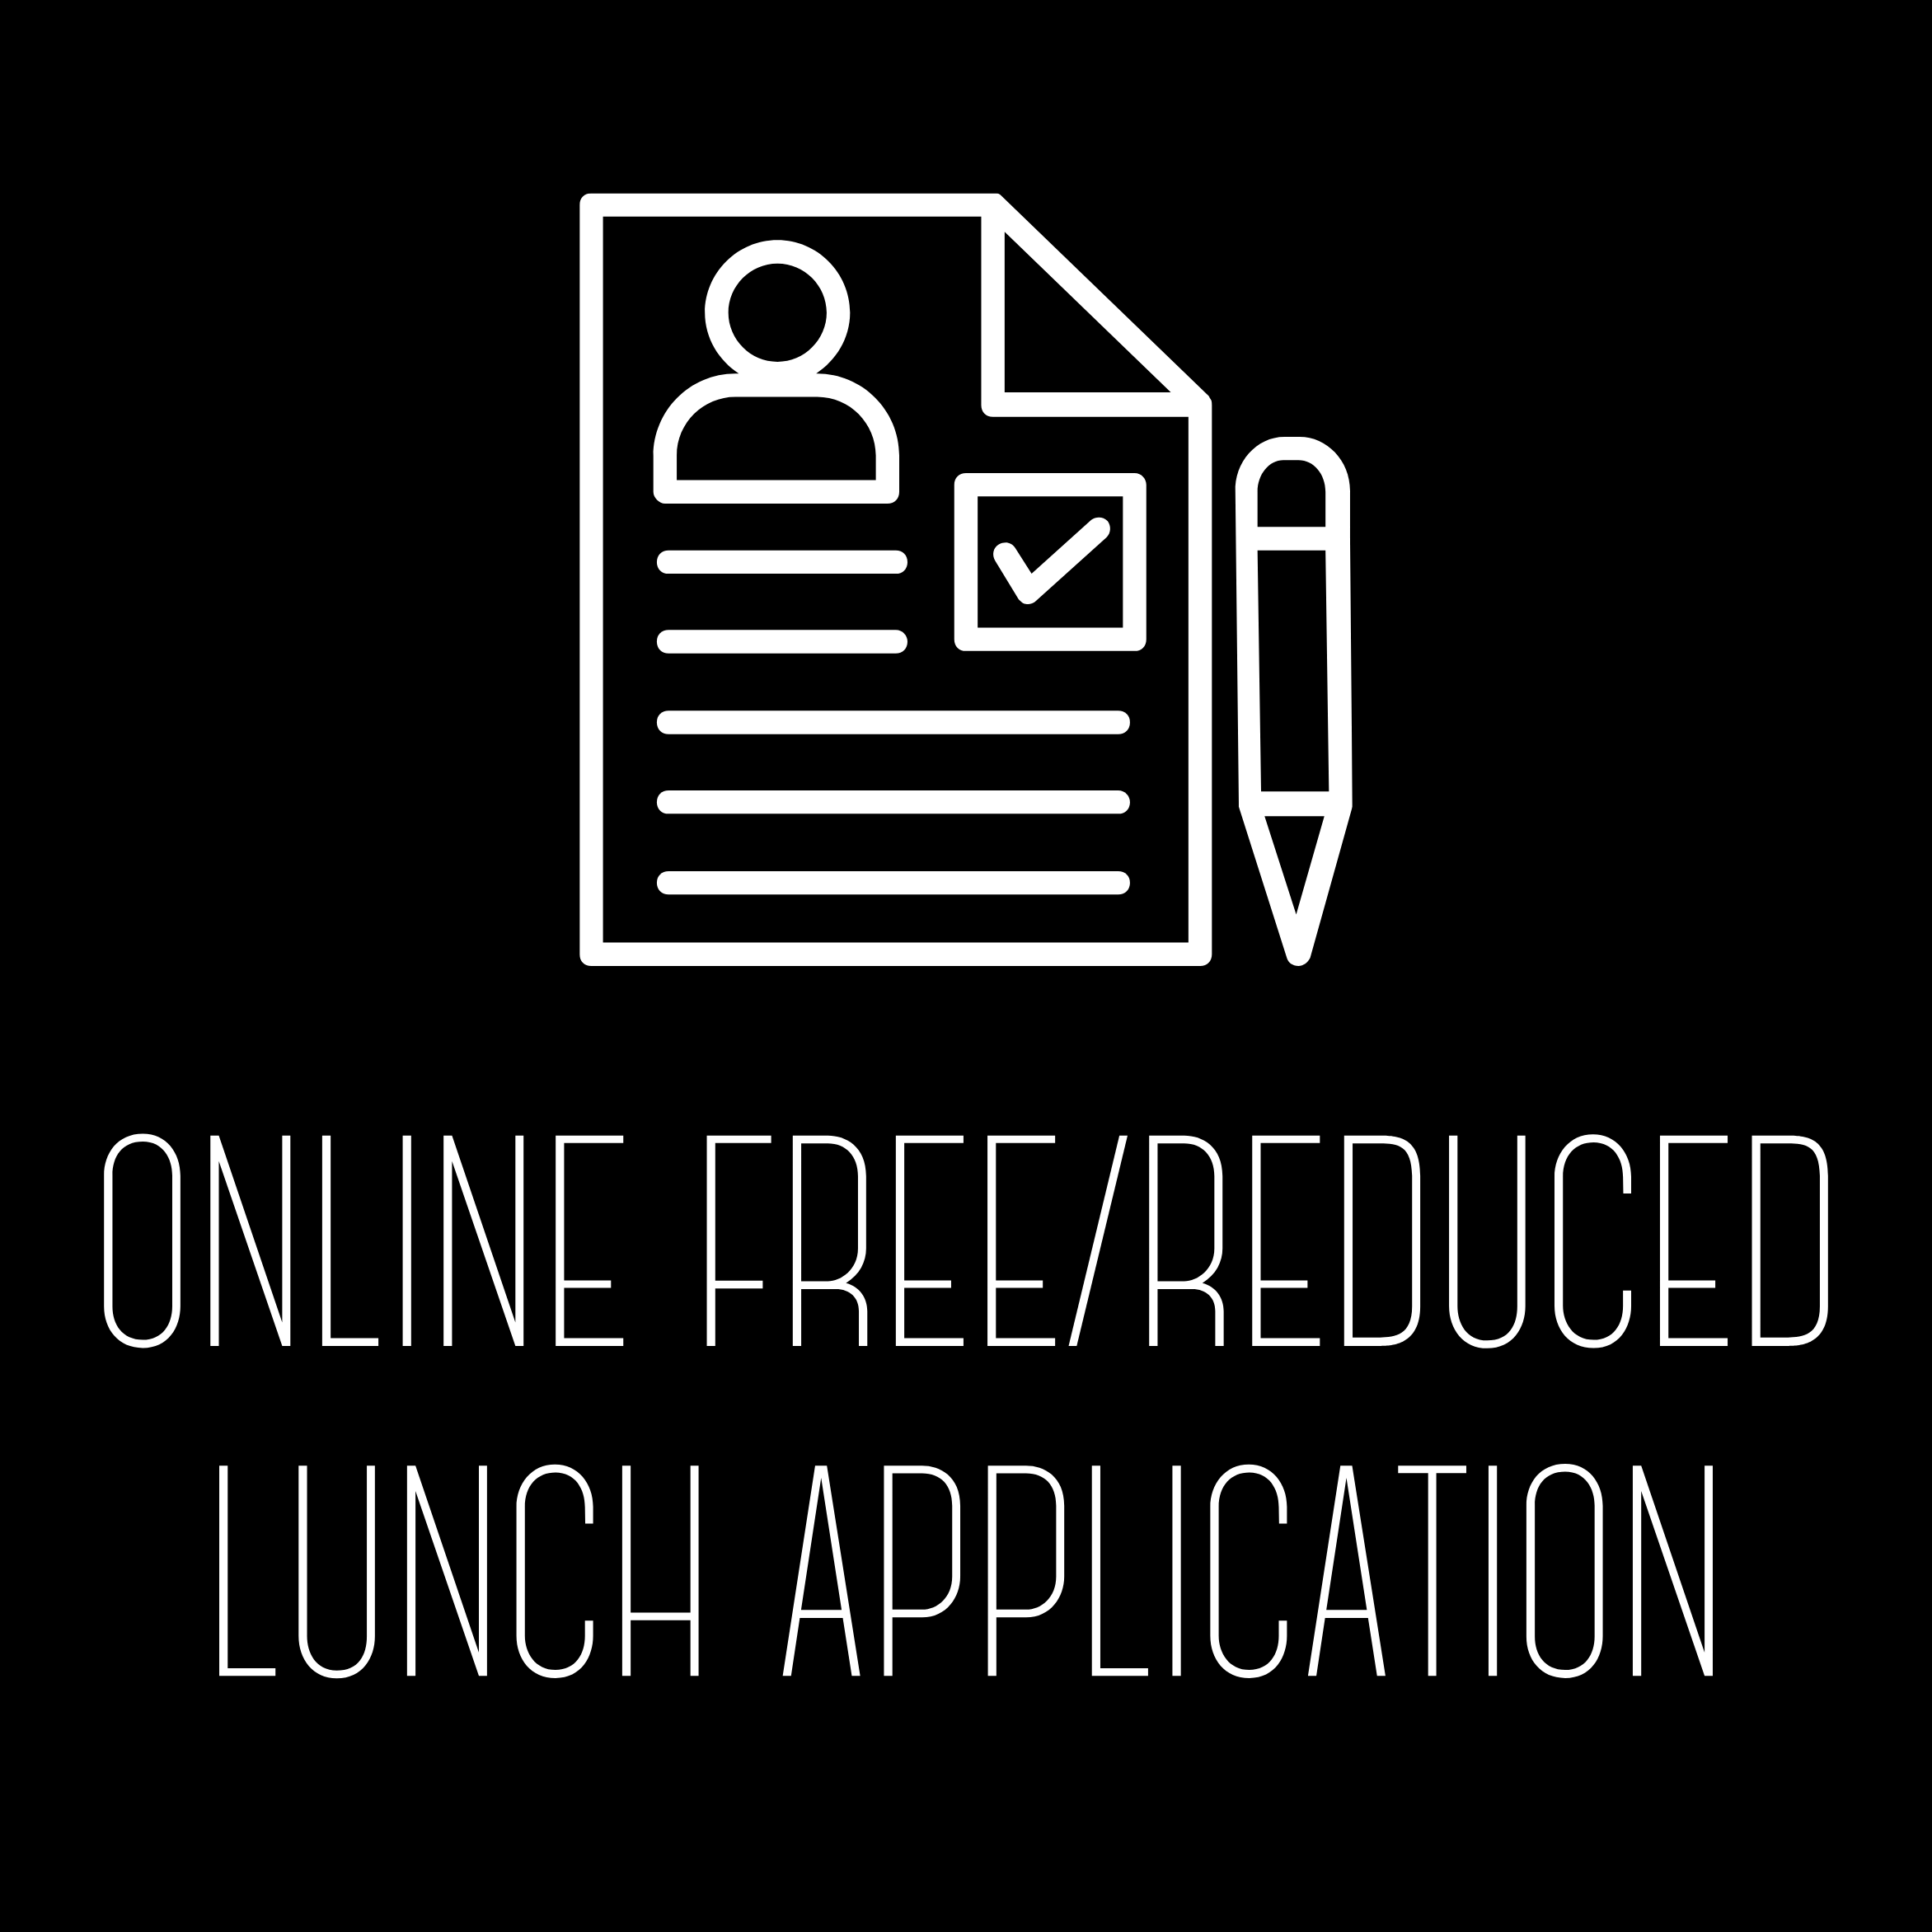 Online Free and Reduced Lunch Application